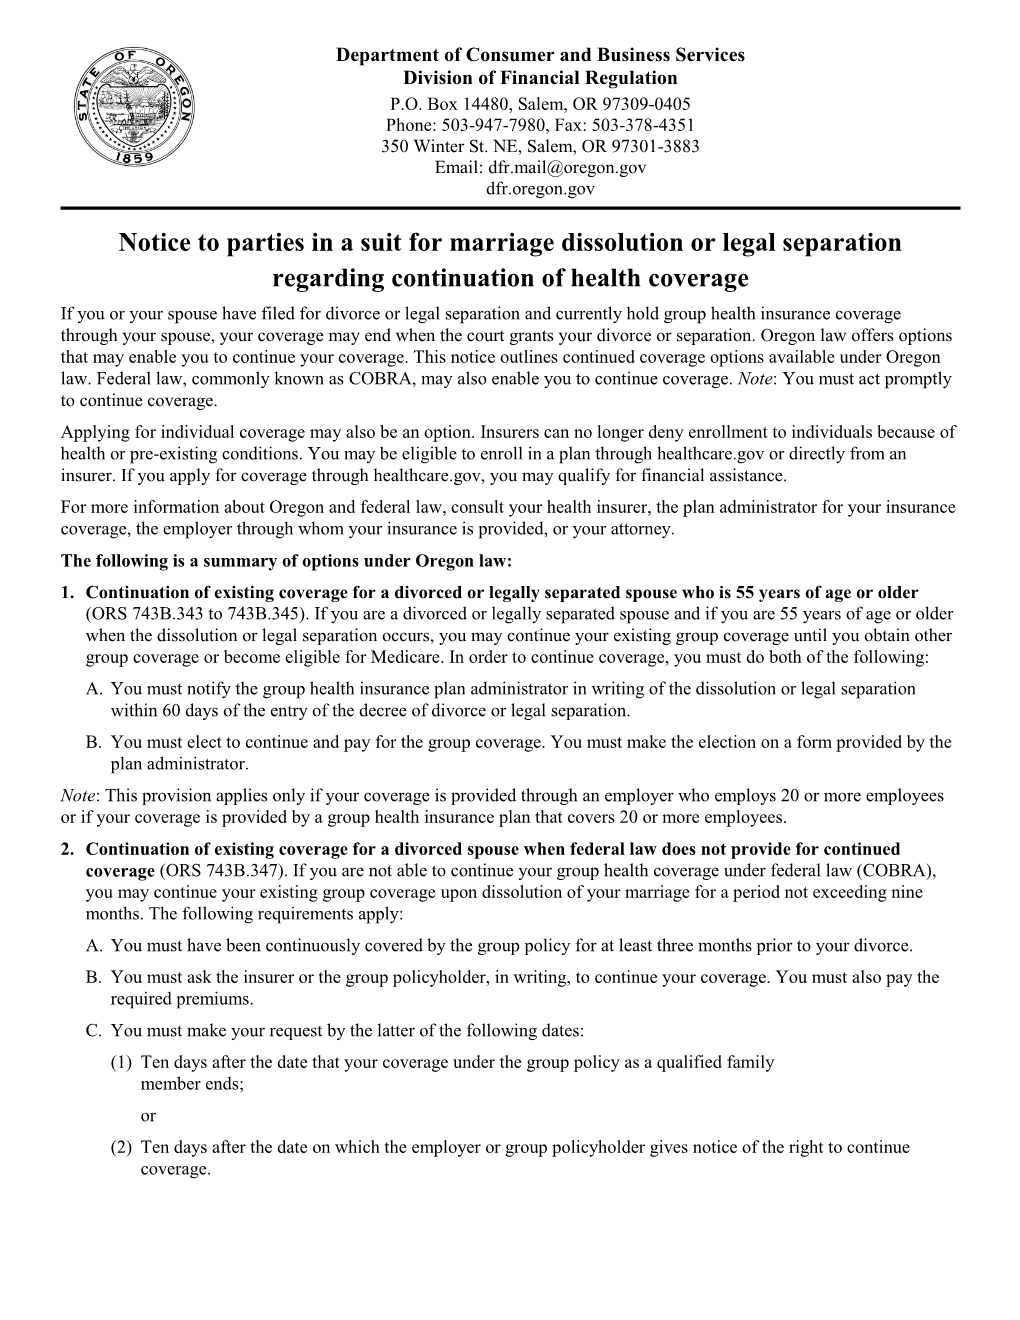 Notice to Parties in a Suit for Marriage